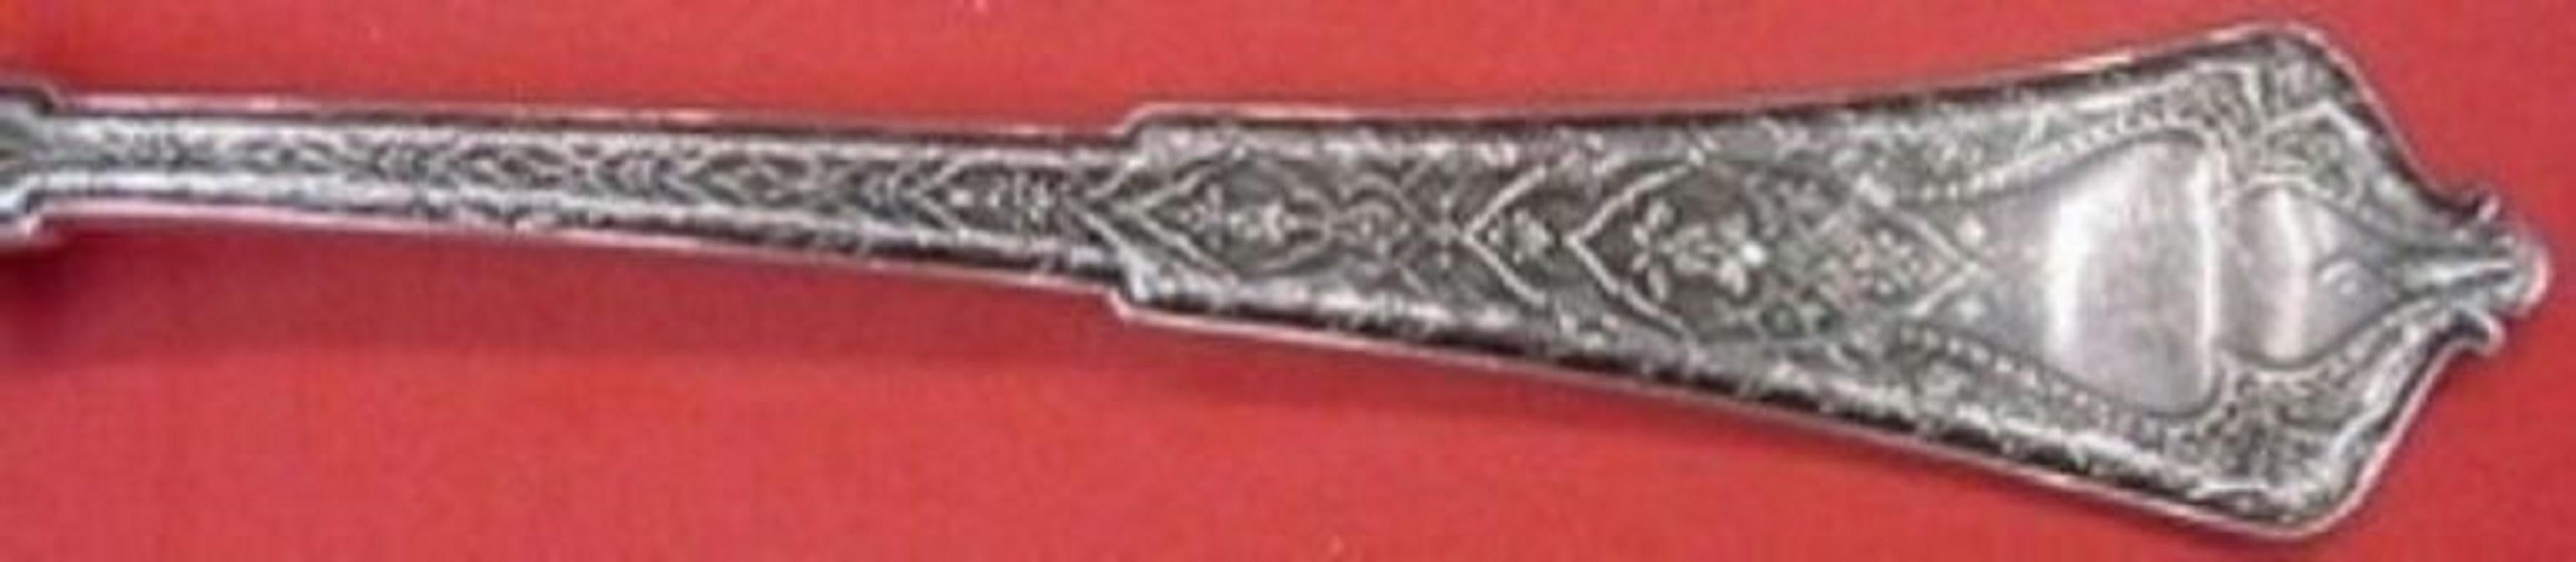 Sterling silver fish knife 8 1/4